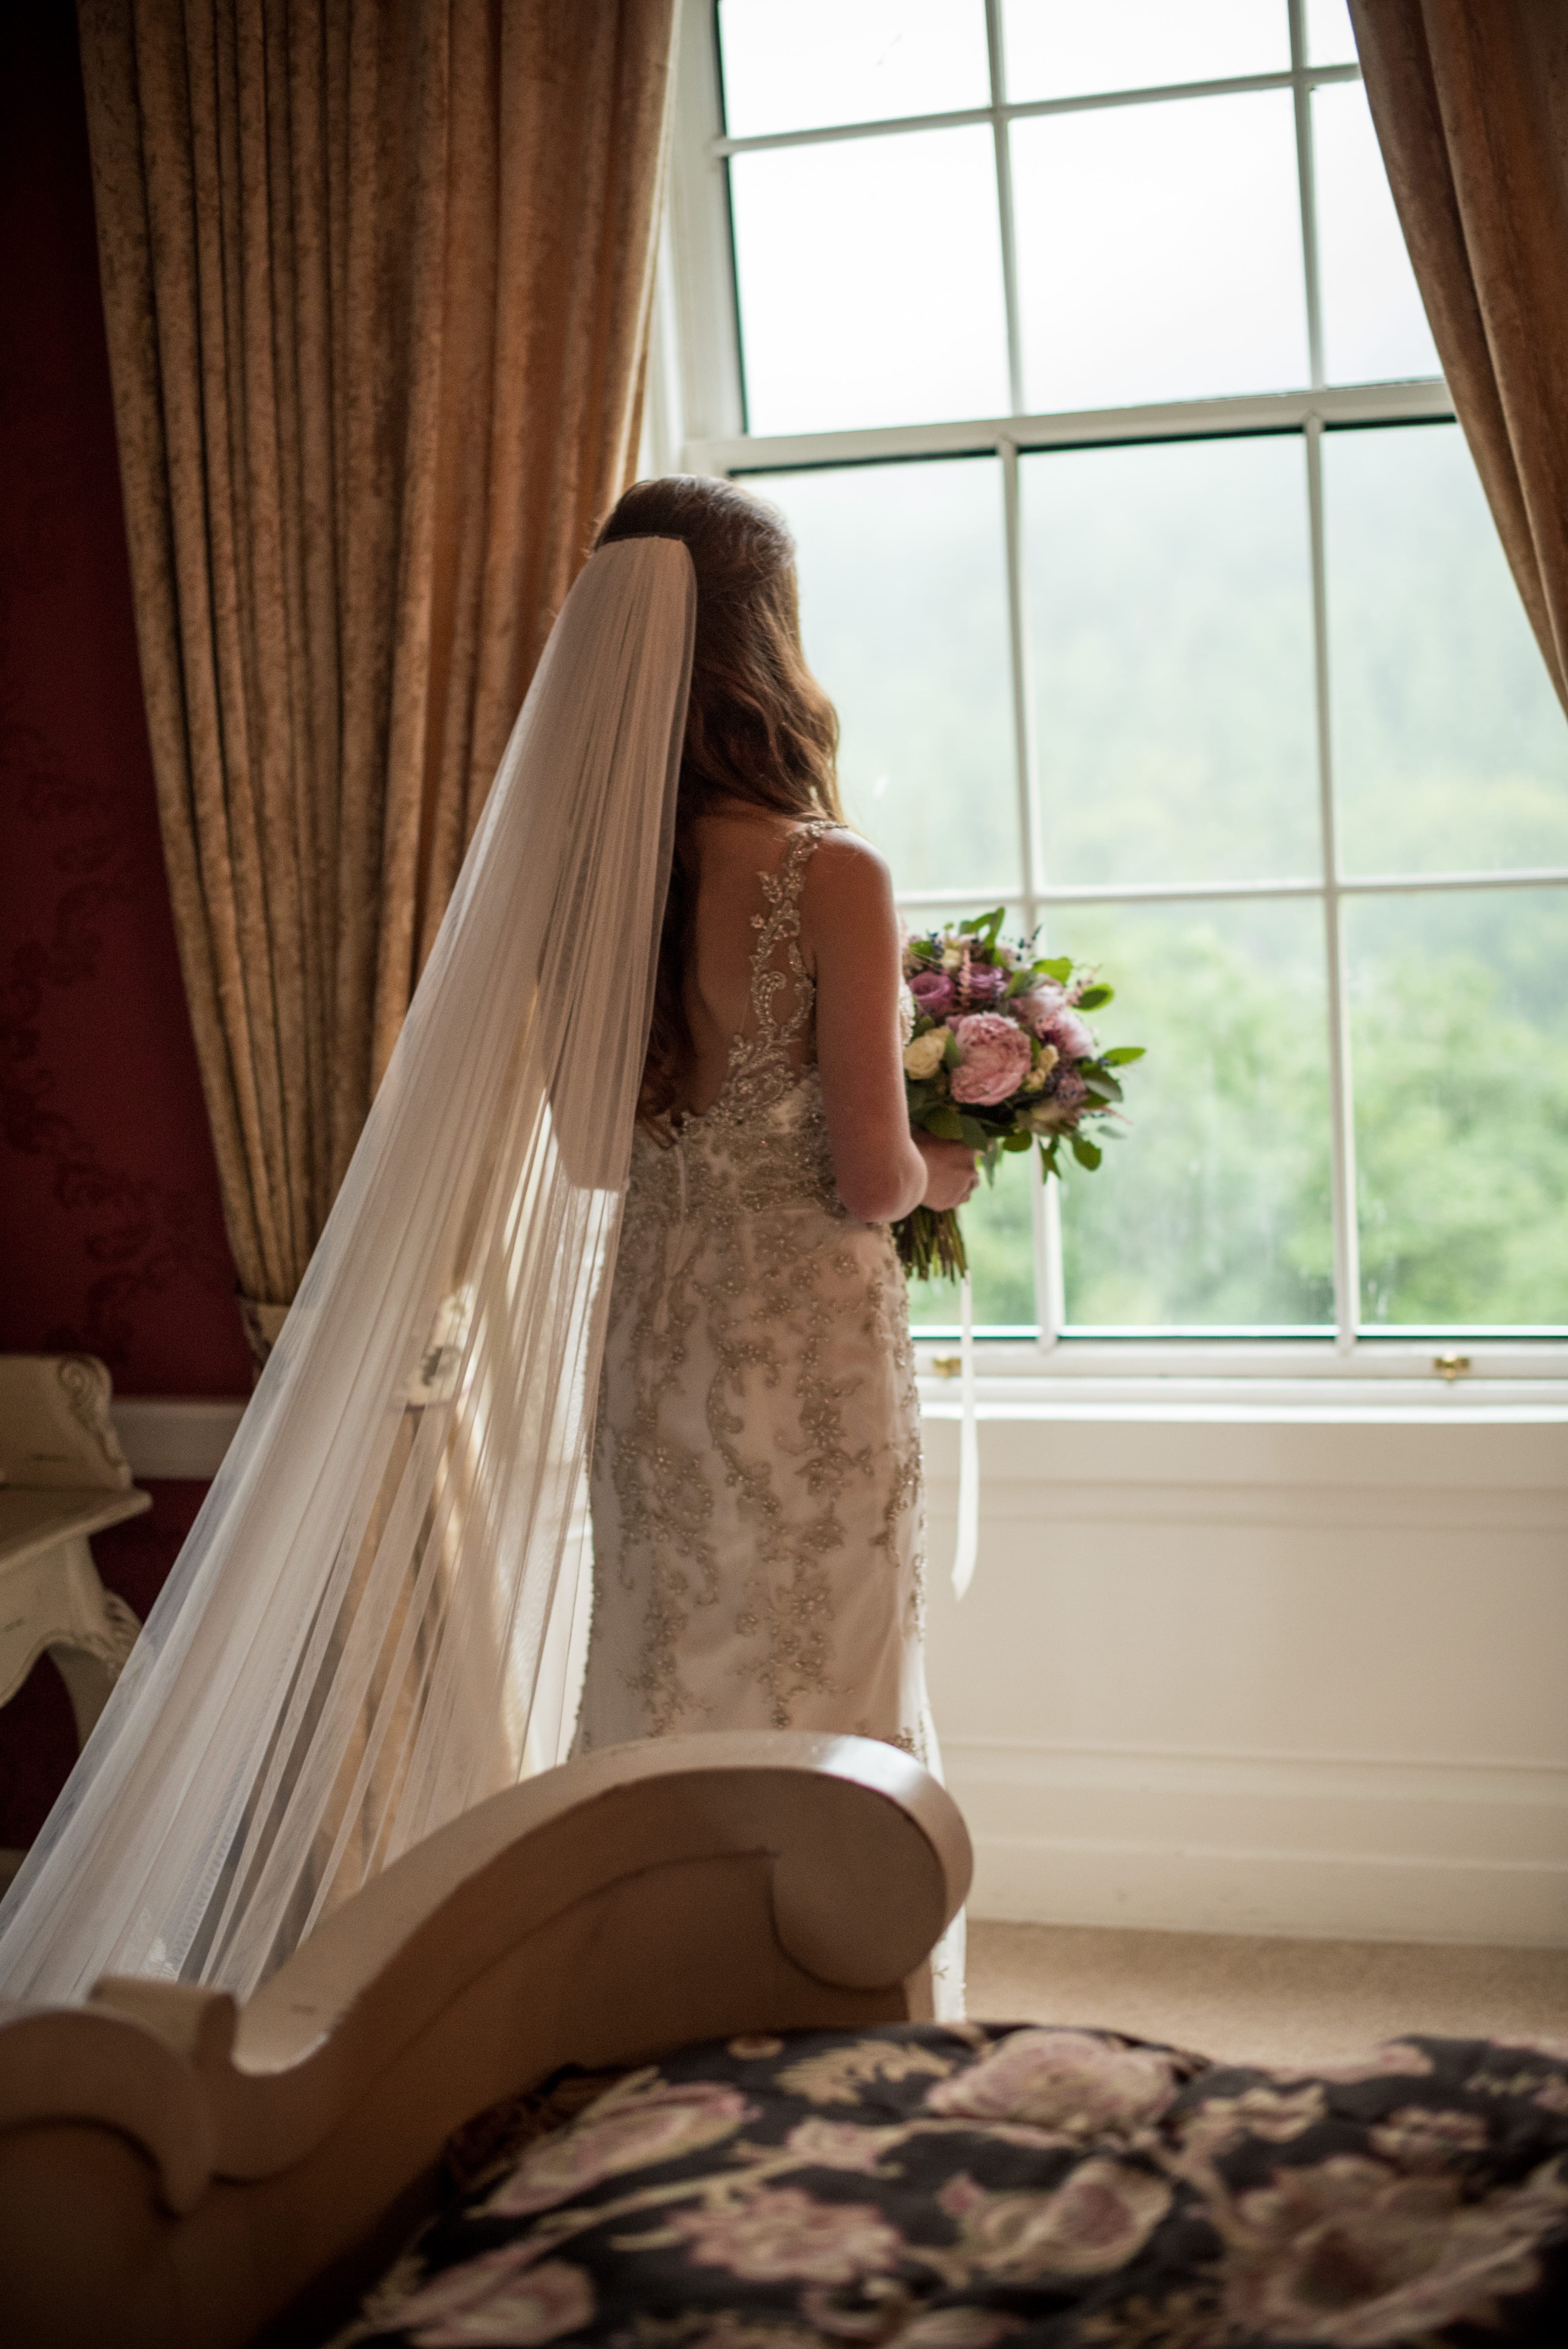 This Intimate Manor Wedding is the Ideal Balance of Soft Glamour, Rustic Whimsy, and Classic Elegance. Greer wedding dress by Maggie Sottero.